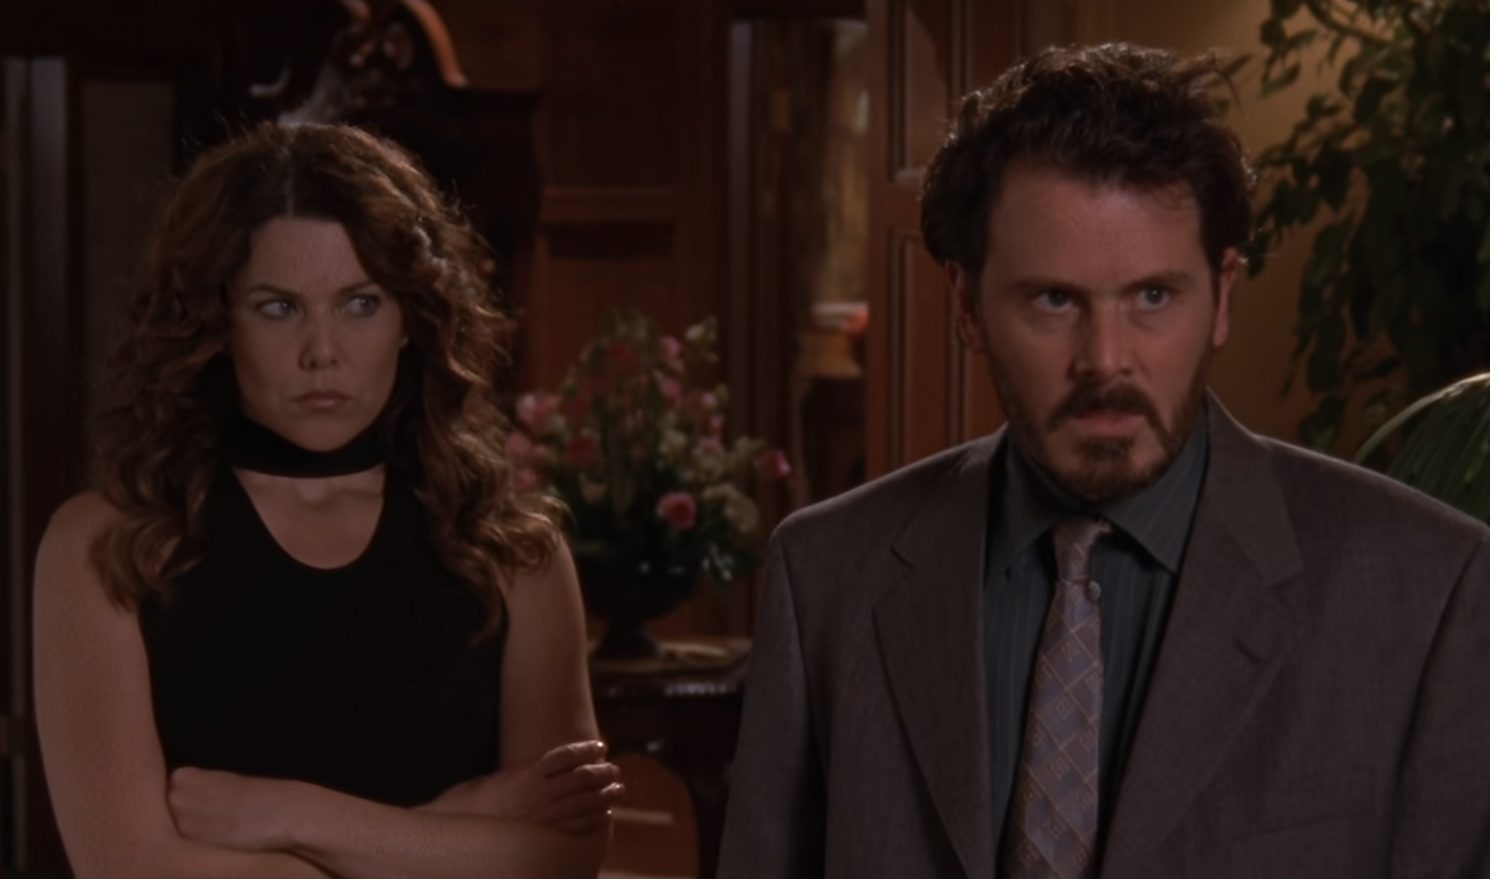 Lorelai Gilmore, in a black dress, stands with Jason Stiles, in a season 4 episode of 'Gilmore Girls'